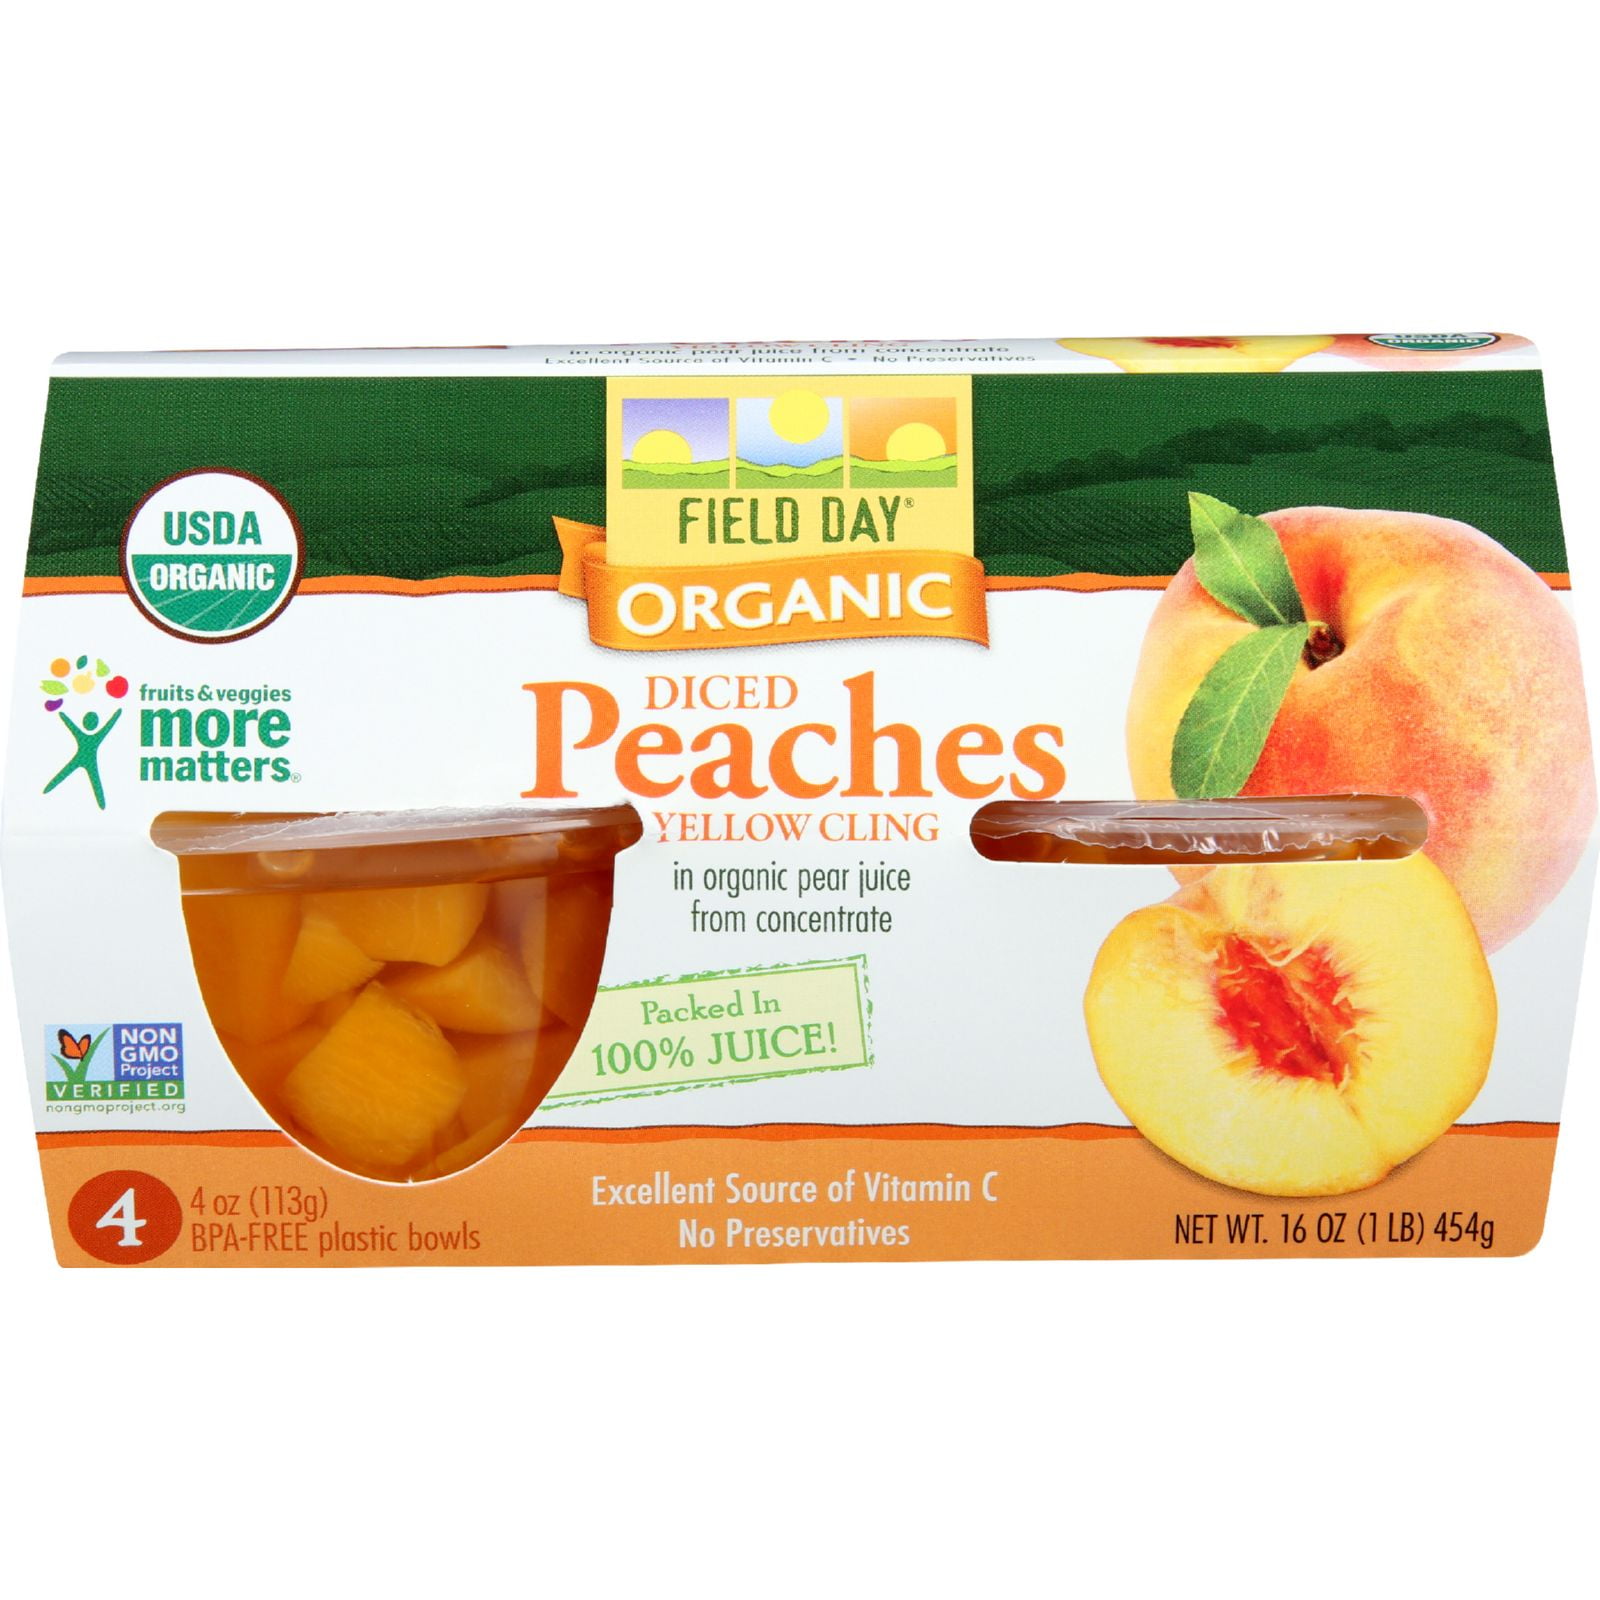 Field Day Fruit Cups - Organic - Yellow Cling Peaches - Diced